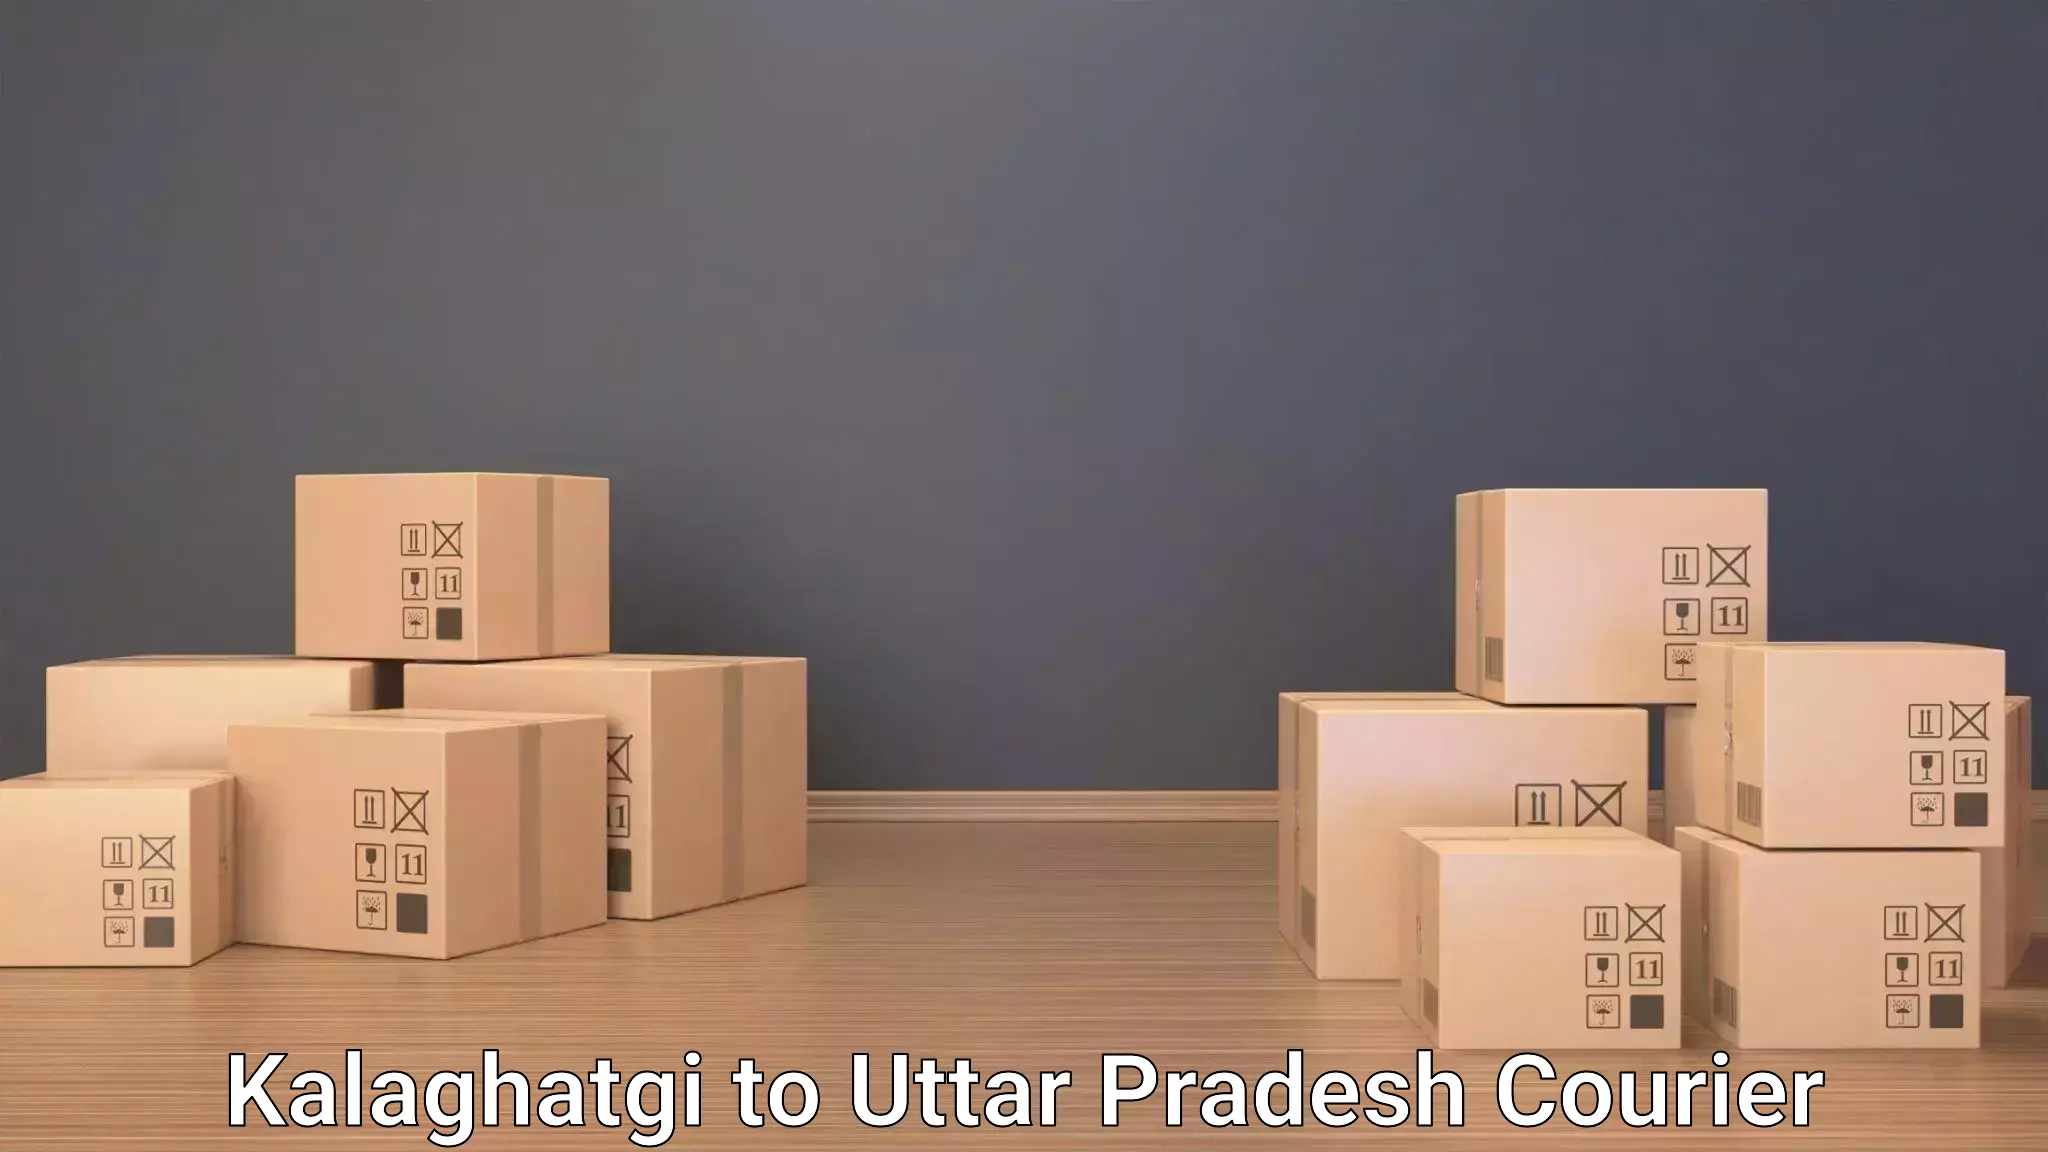 Baggage relocation service in Kalaghatgi to Bijpur